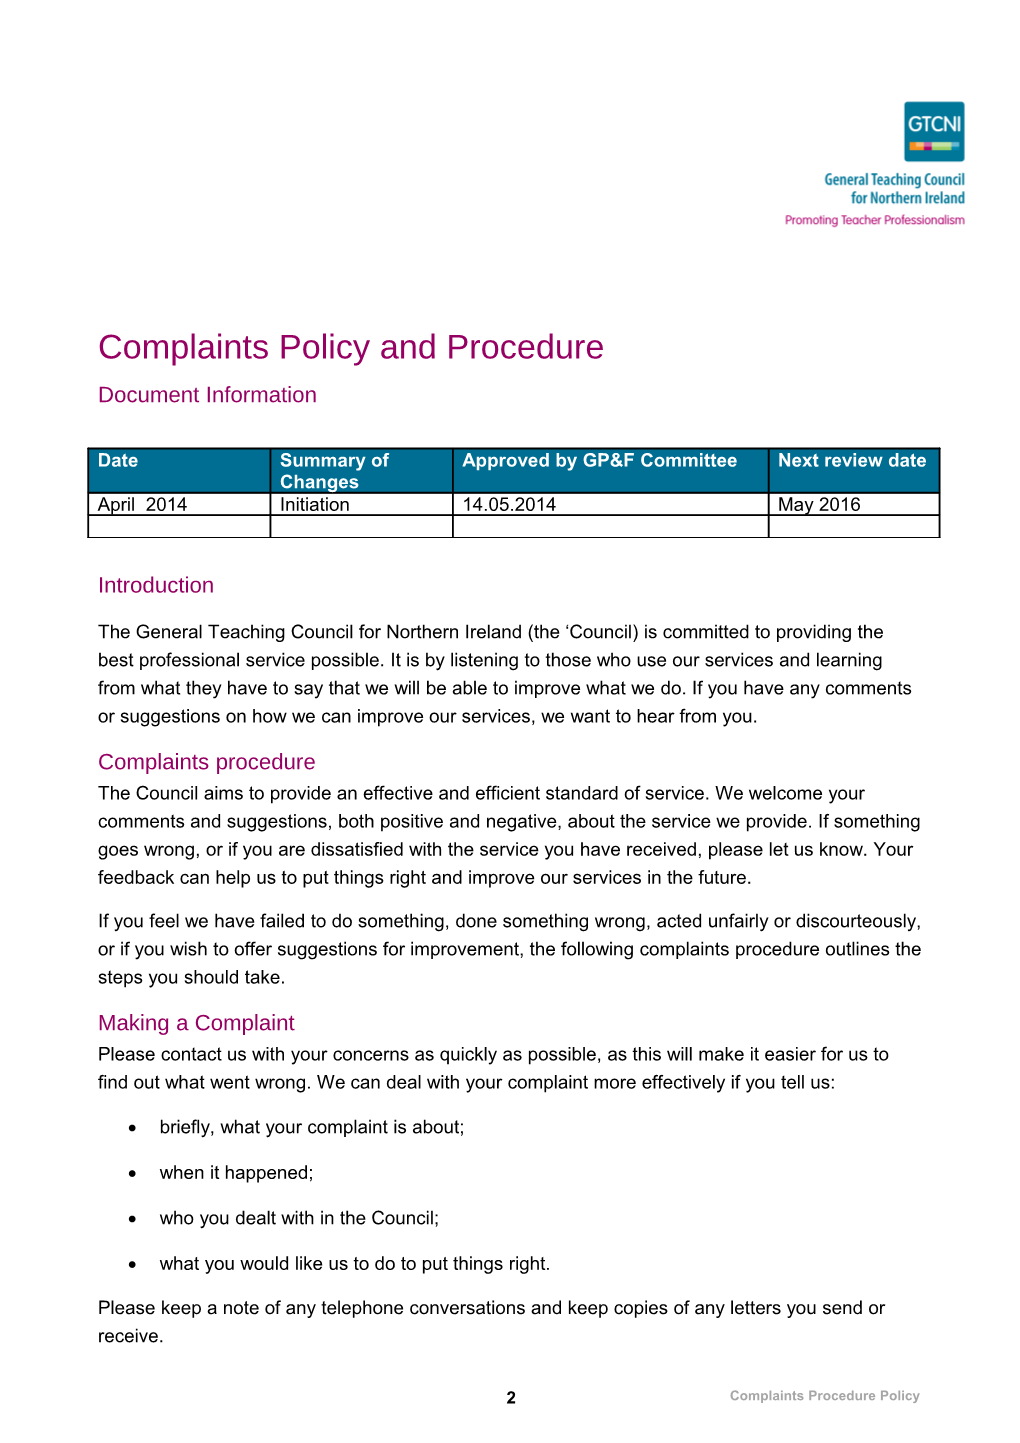 Complaints Policy and Procedure